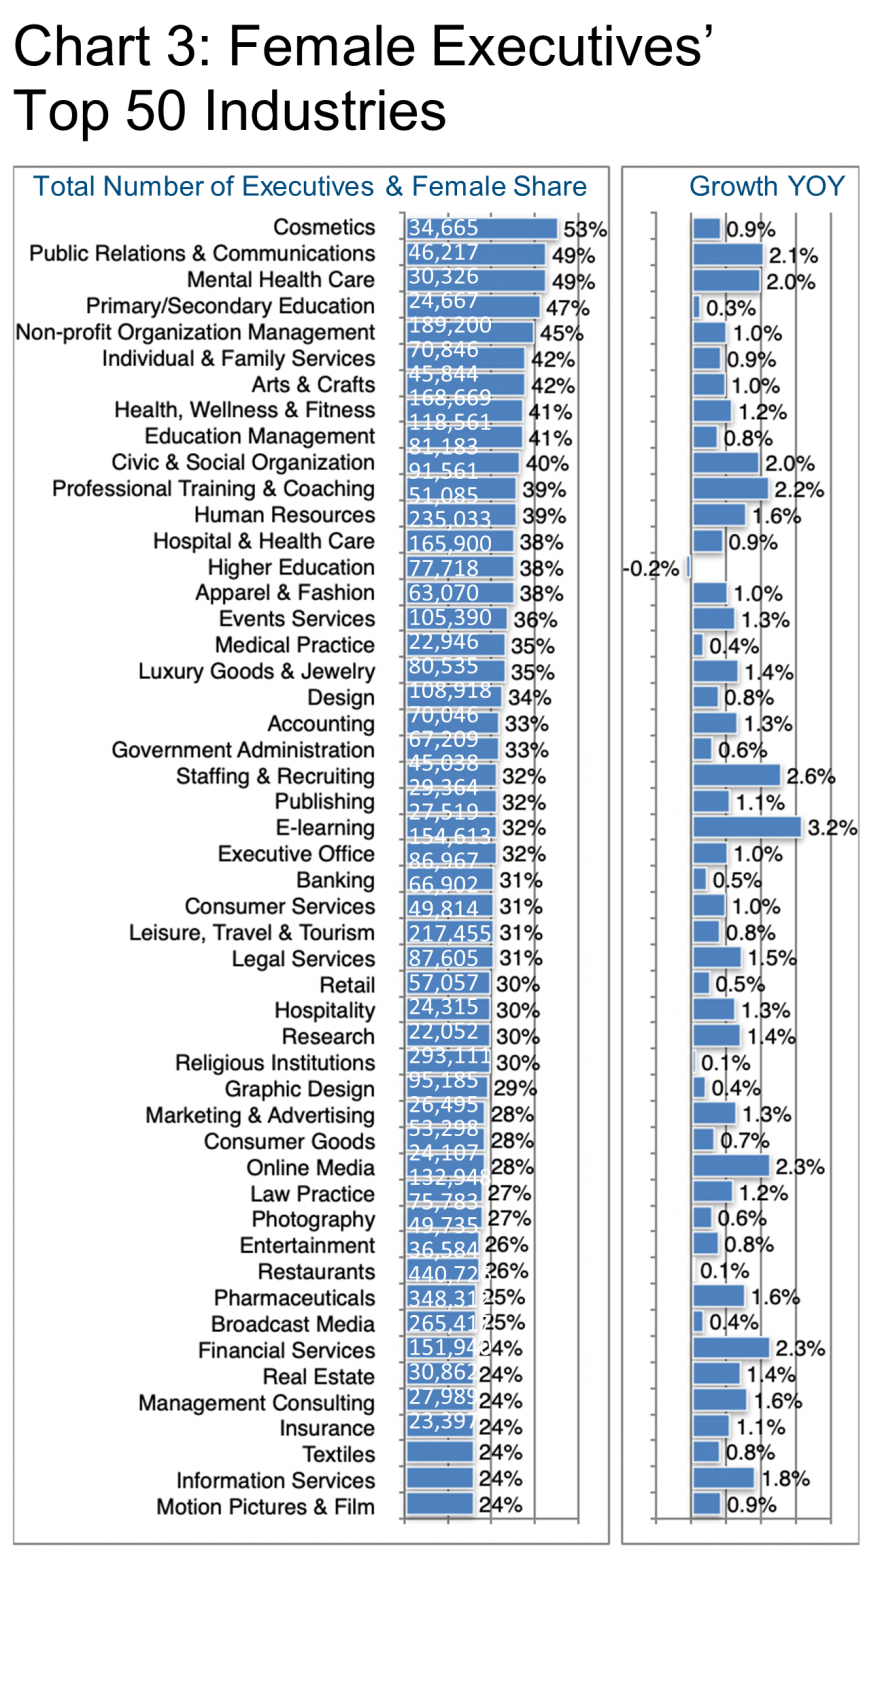 Female Executives Top 50 Industries-Chart 3.